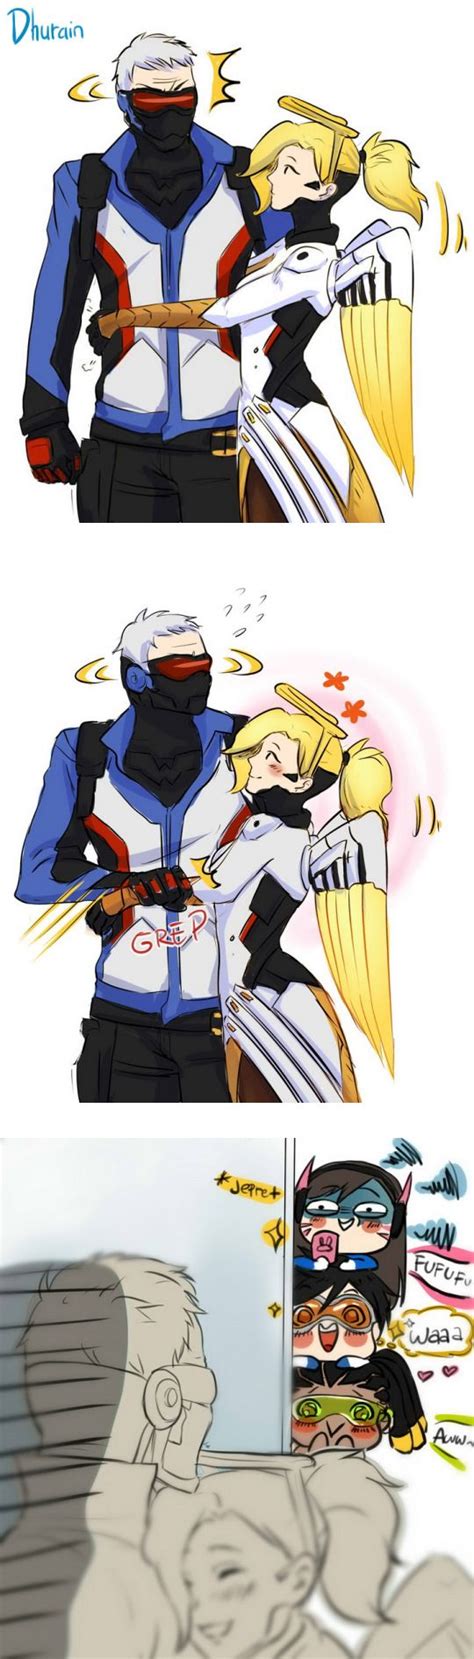 Soldier 76 And Mercy As A Couple Love Hug Dva Tracer And Lucio